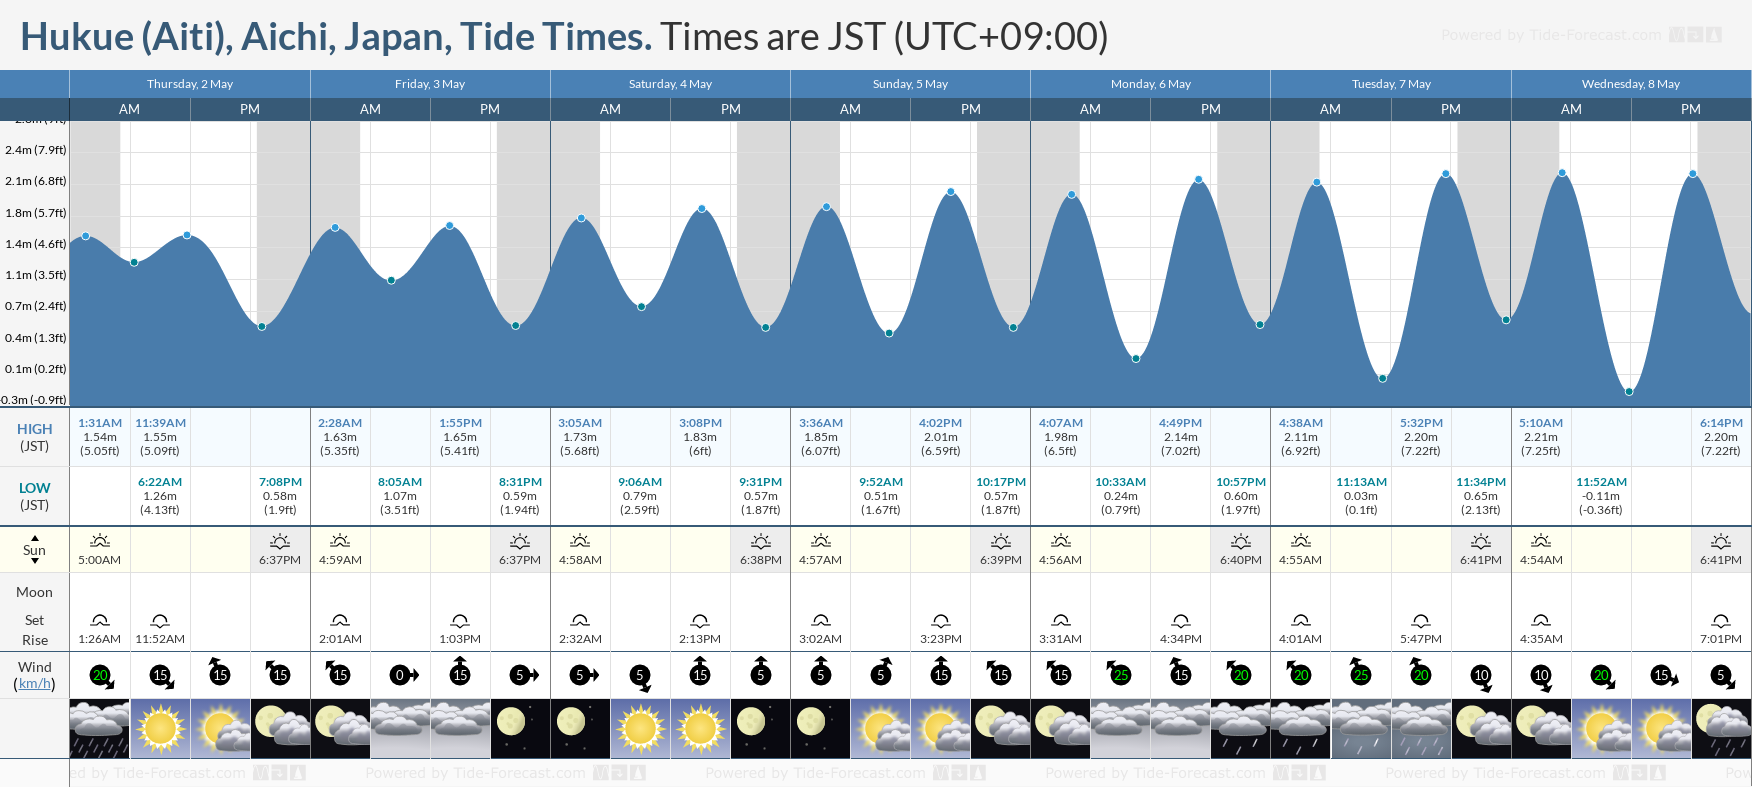 Hukue (Aiti), Aichi, Japan Tide Chart including high and low tide tide times for the next 7 days